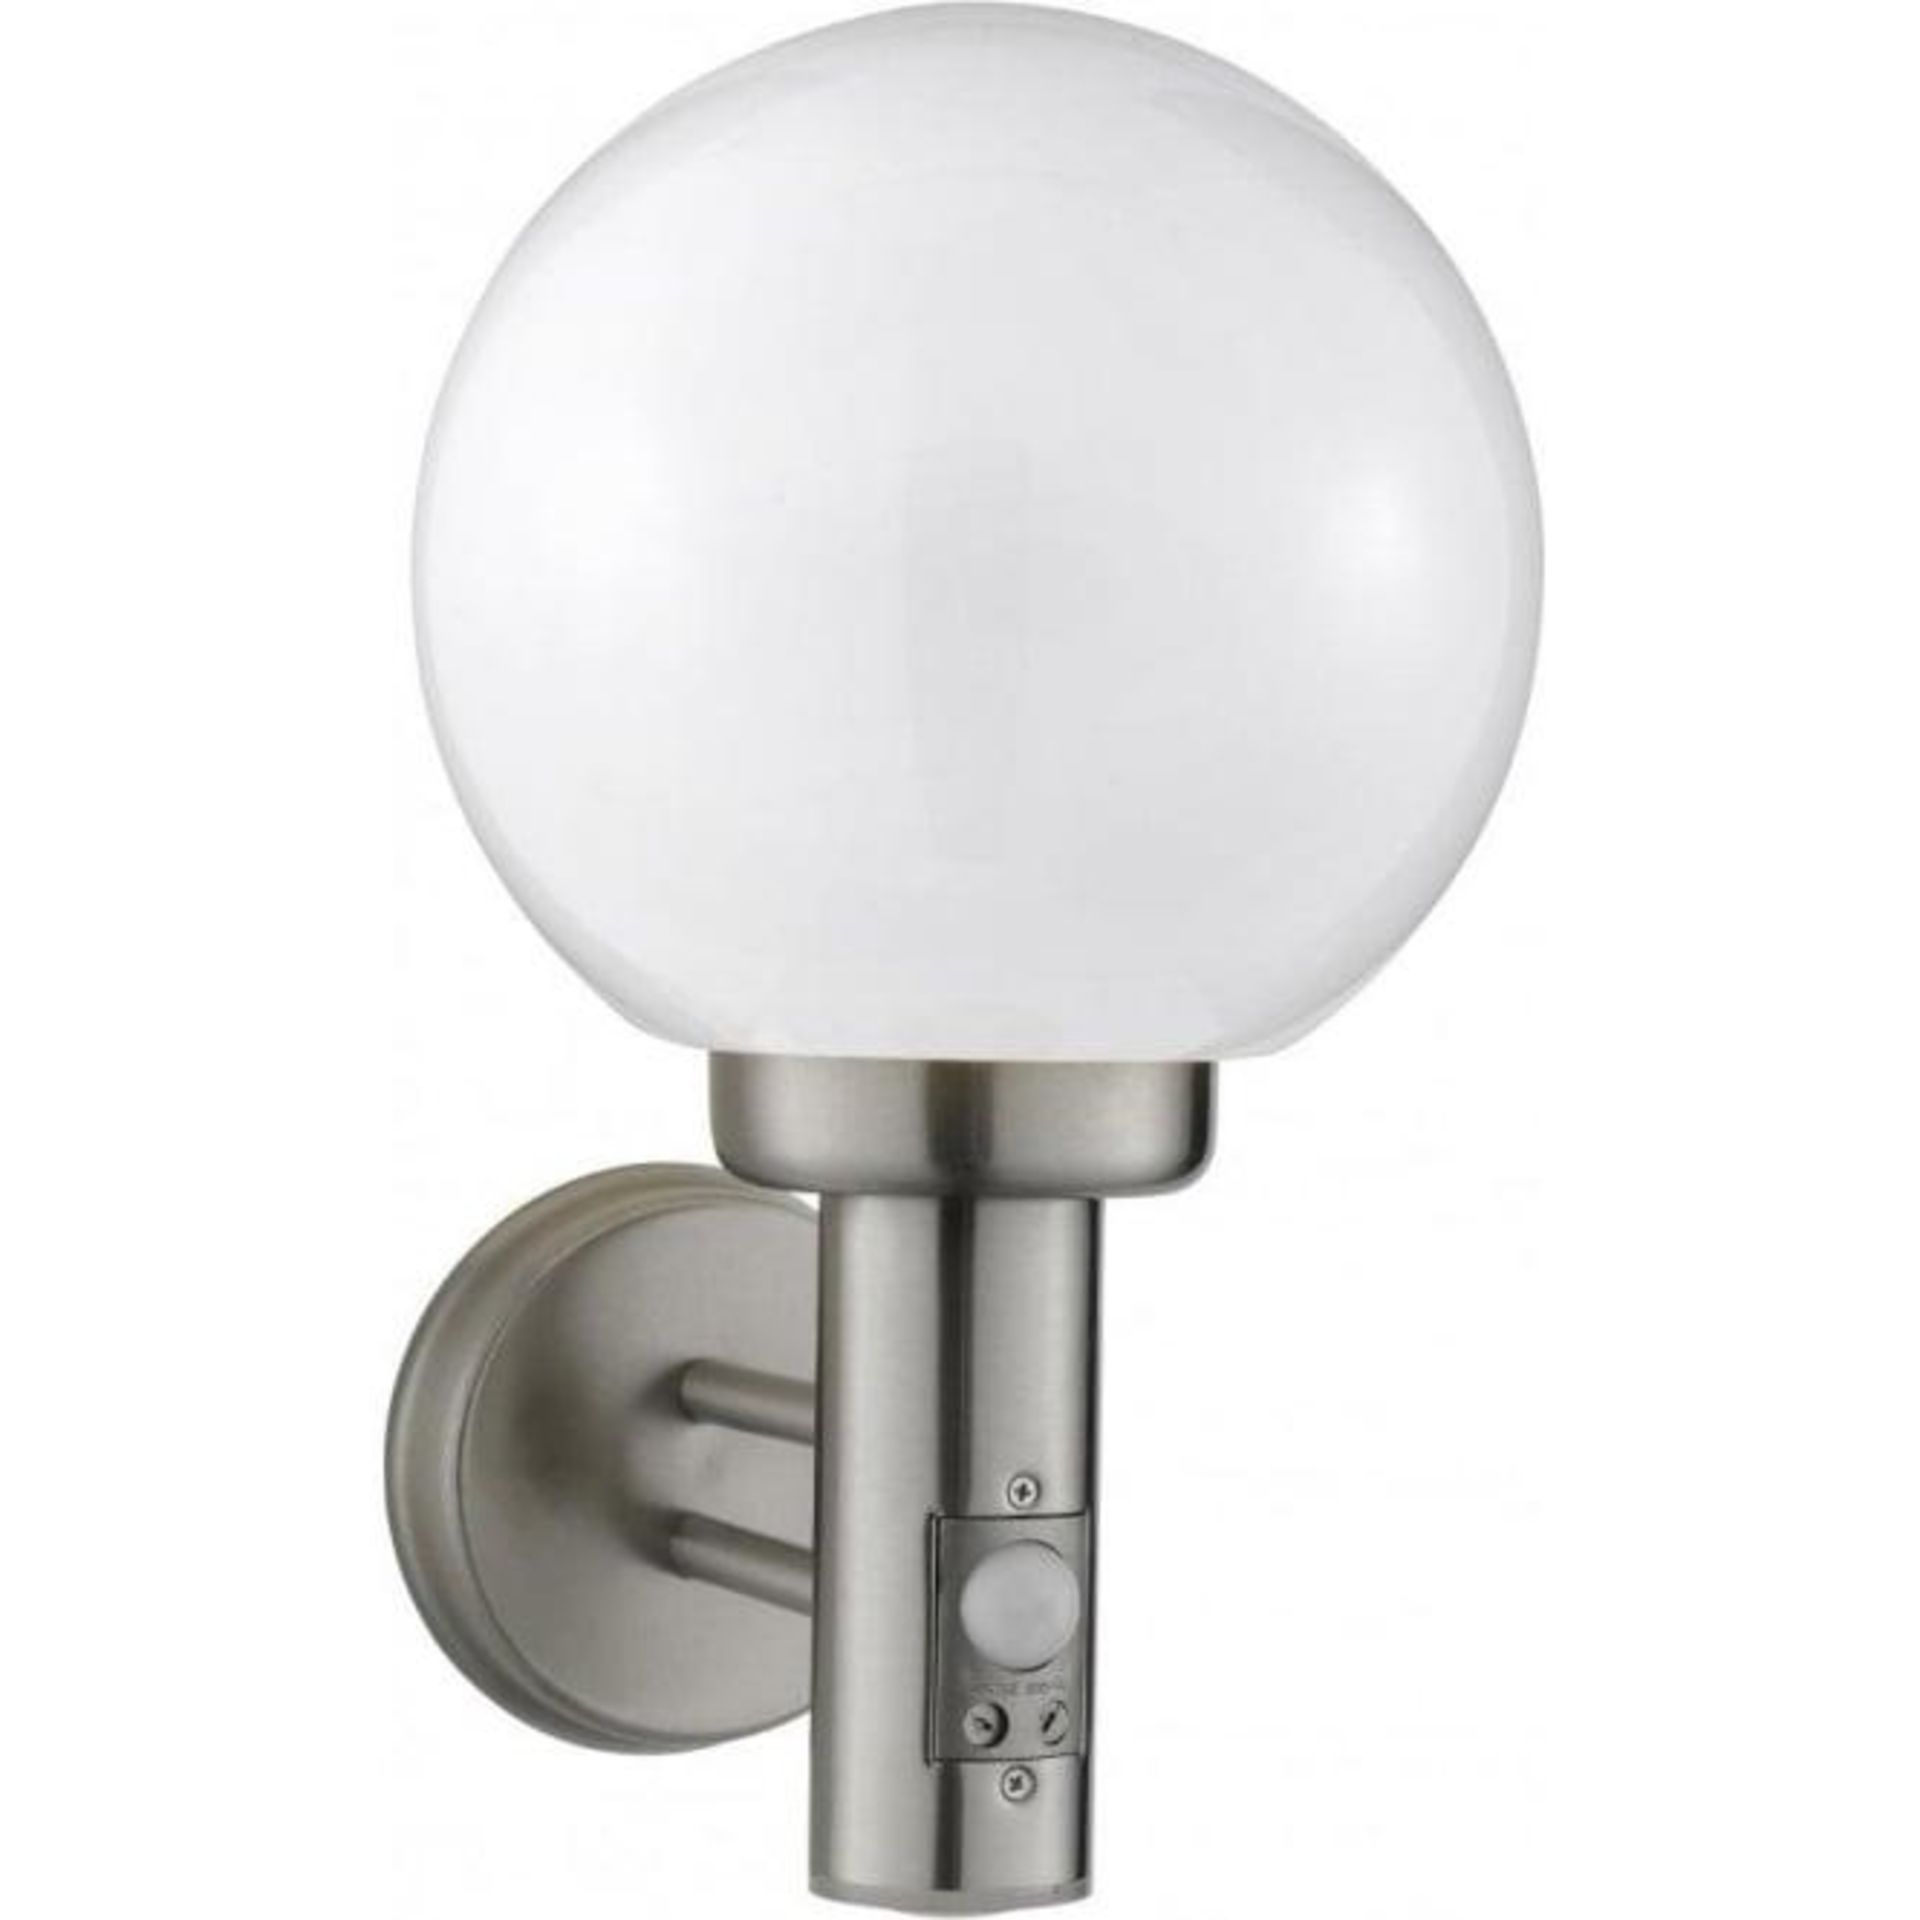 2 x Globe Outdoor Wall Light With PIR Motion Sensor - Stainless Steel With Polycarbonate Shade - IP4 - Image 3 of 5